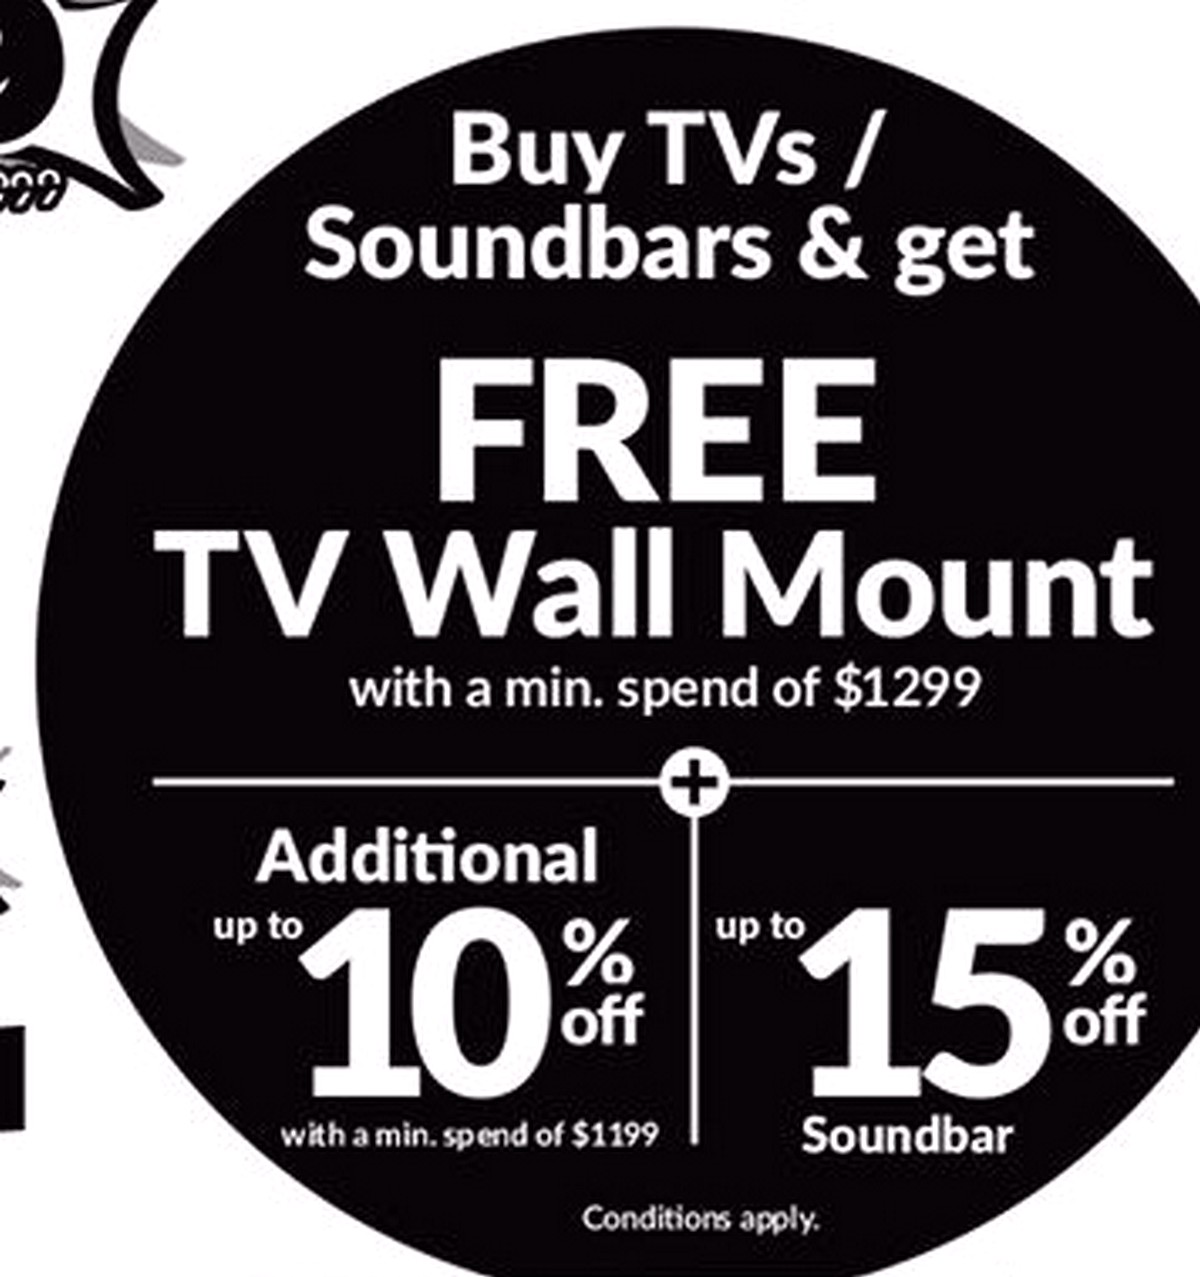 Courts-Buy-TVs-or-Soundbars-Get-FREE-TV-Wall-Mount-2021-Singapore-Clearance-Warehouse-Sale 13-17 May 2021: COURTS Massive Furniture & TV Clearance Sale! Up to 65% OFF & Buy 1 Free 1 Deals!